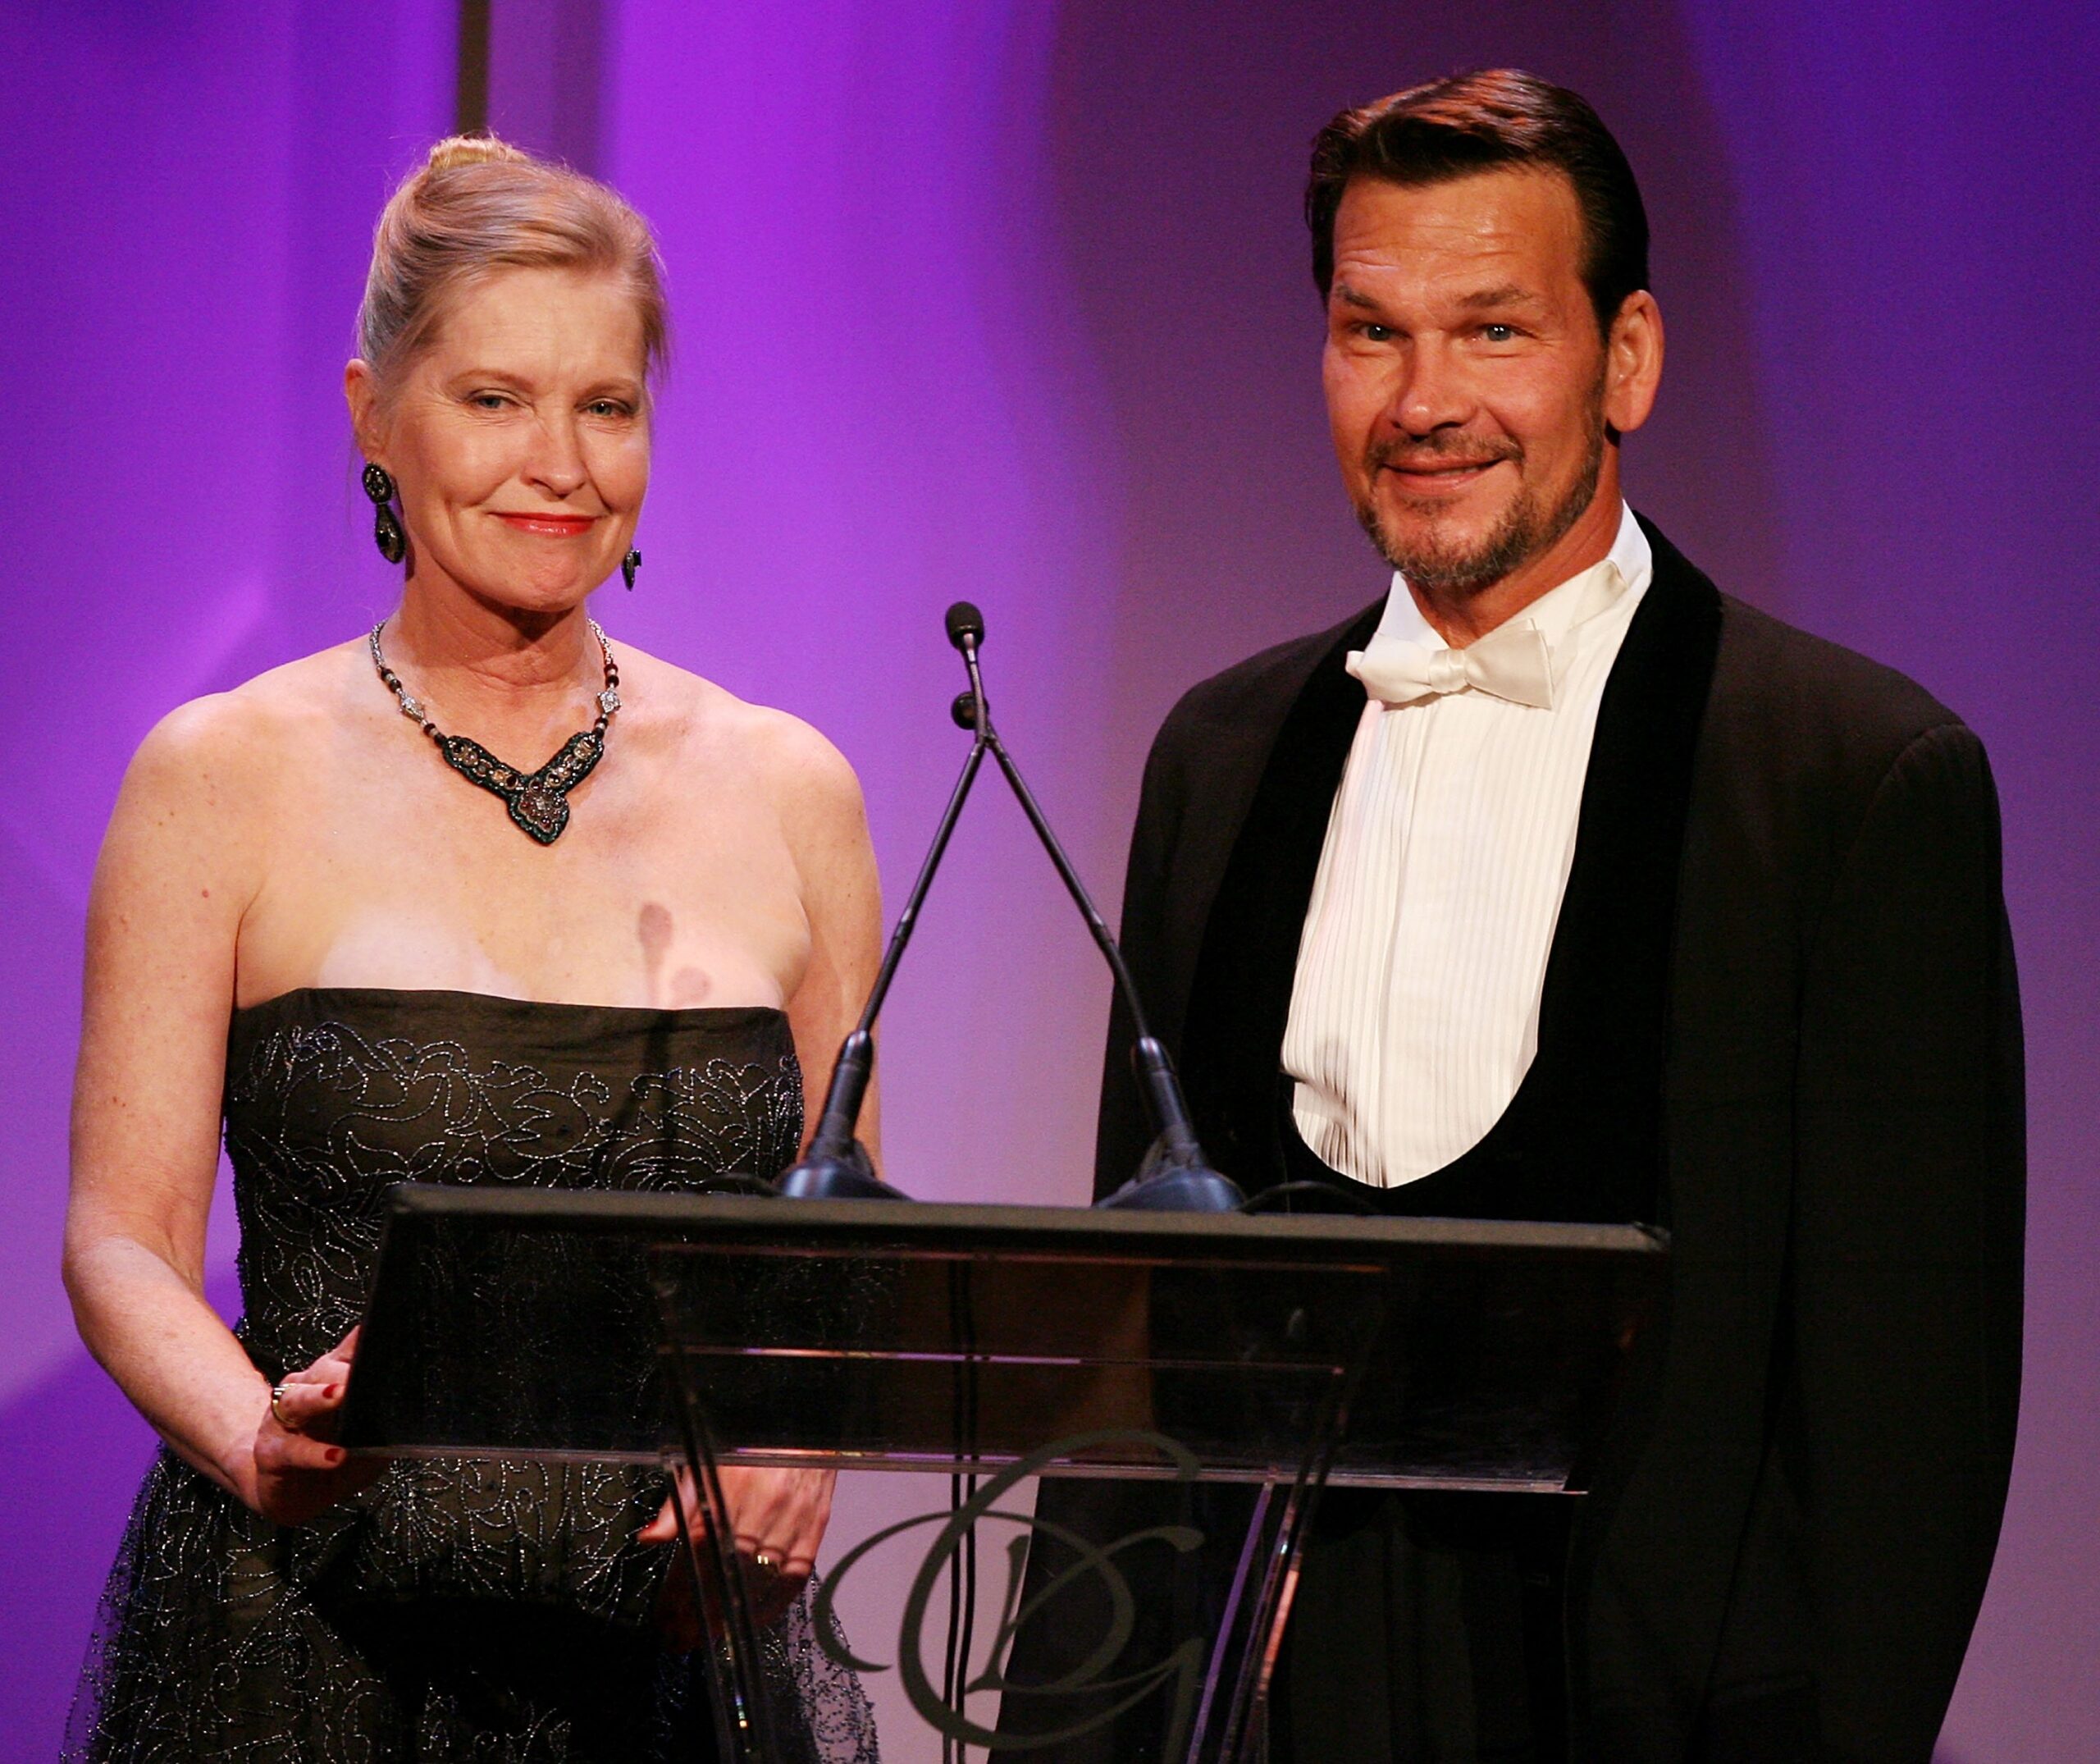 Lisa Niemi (L) and actor Patrick Swayze speak onstage during the 9th annual Costume Designers Guild Awards held at the Beverly Wilshire Hotel on February 17, 2007 in Beverly Hills, California | Source: Getty Images